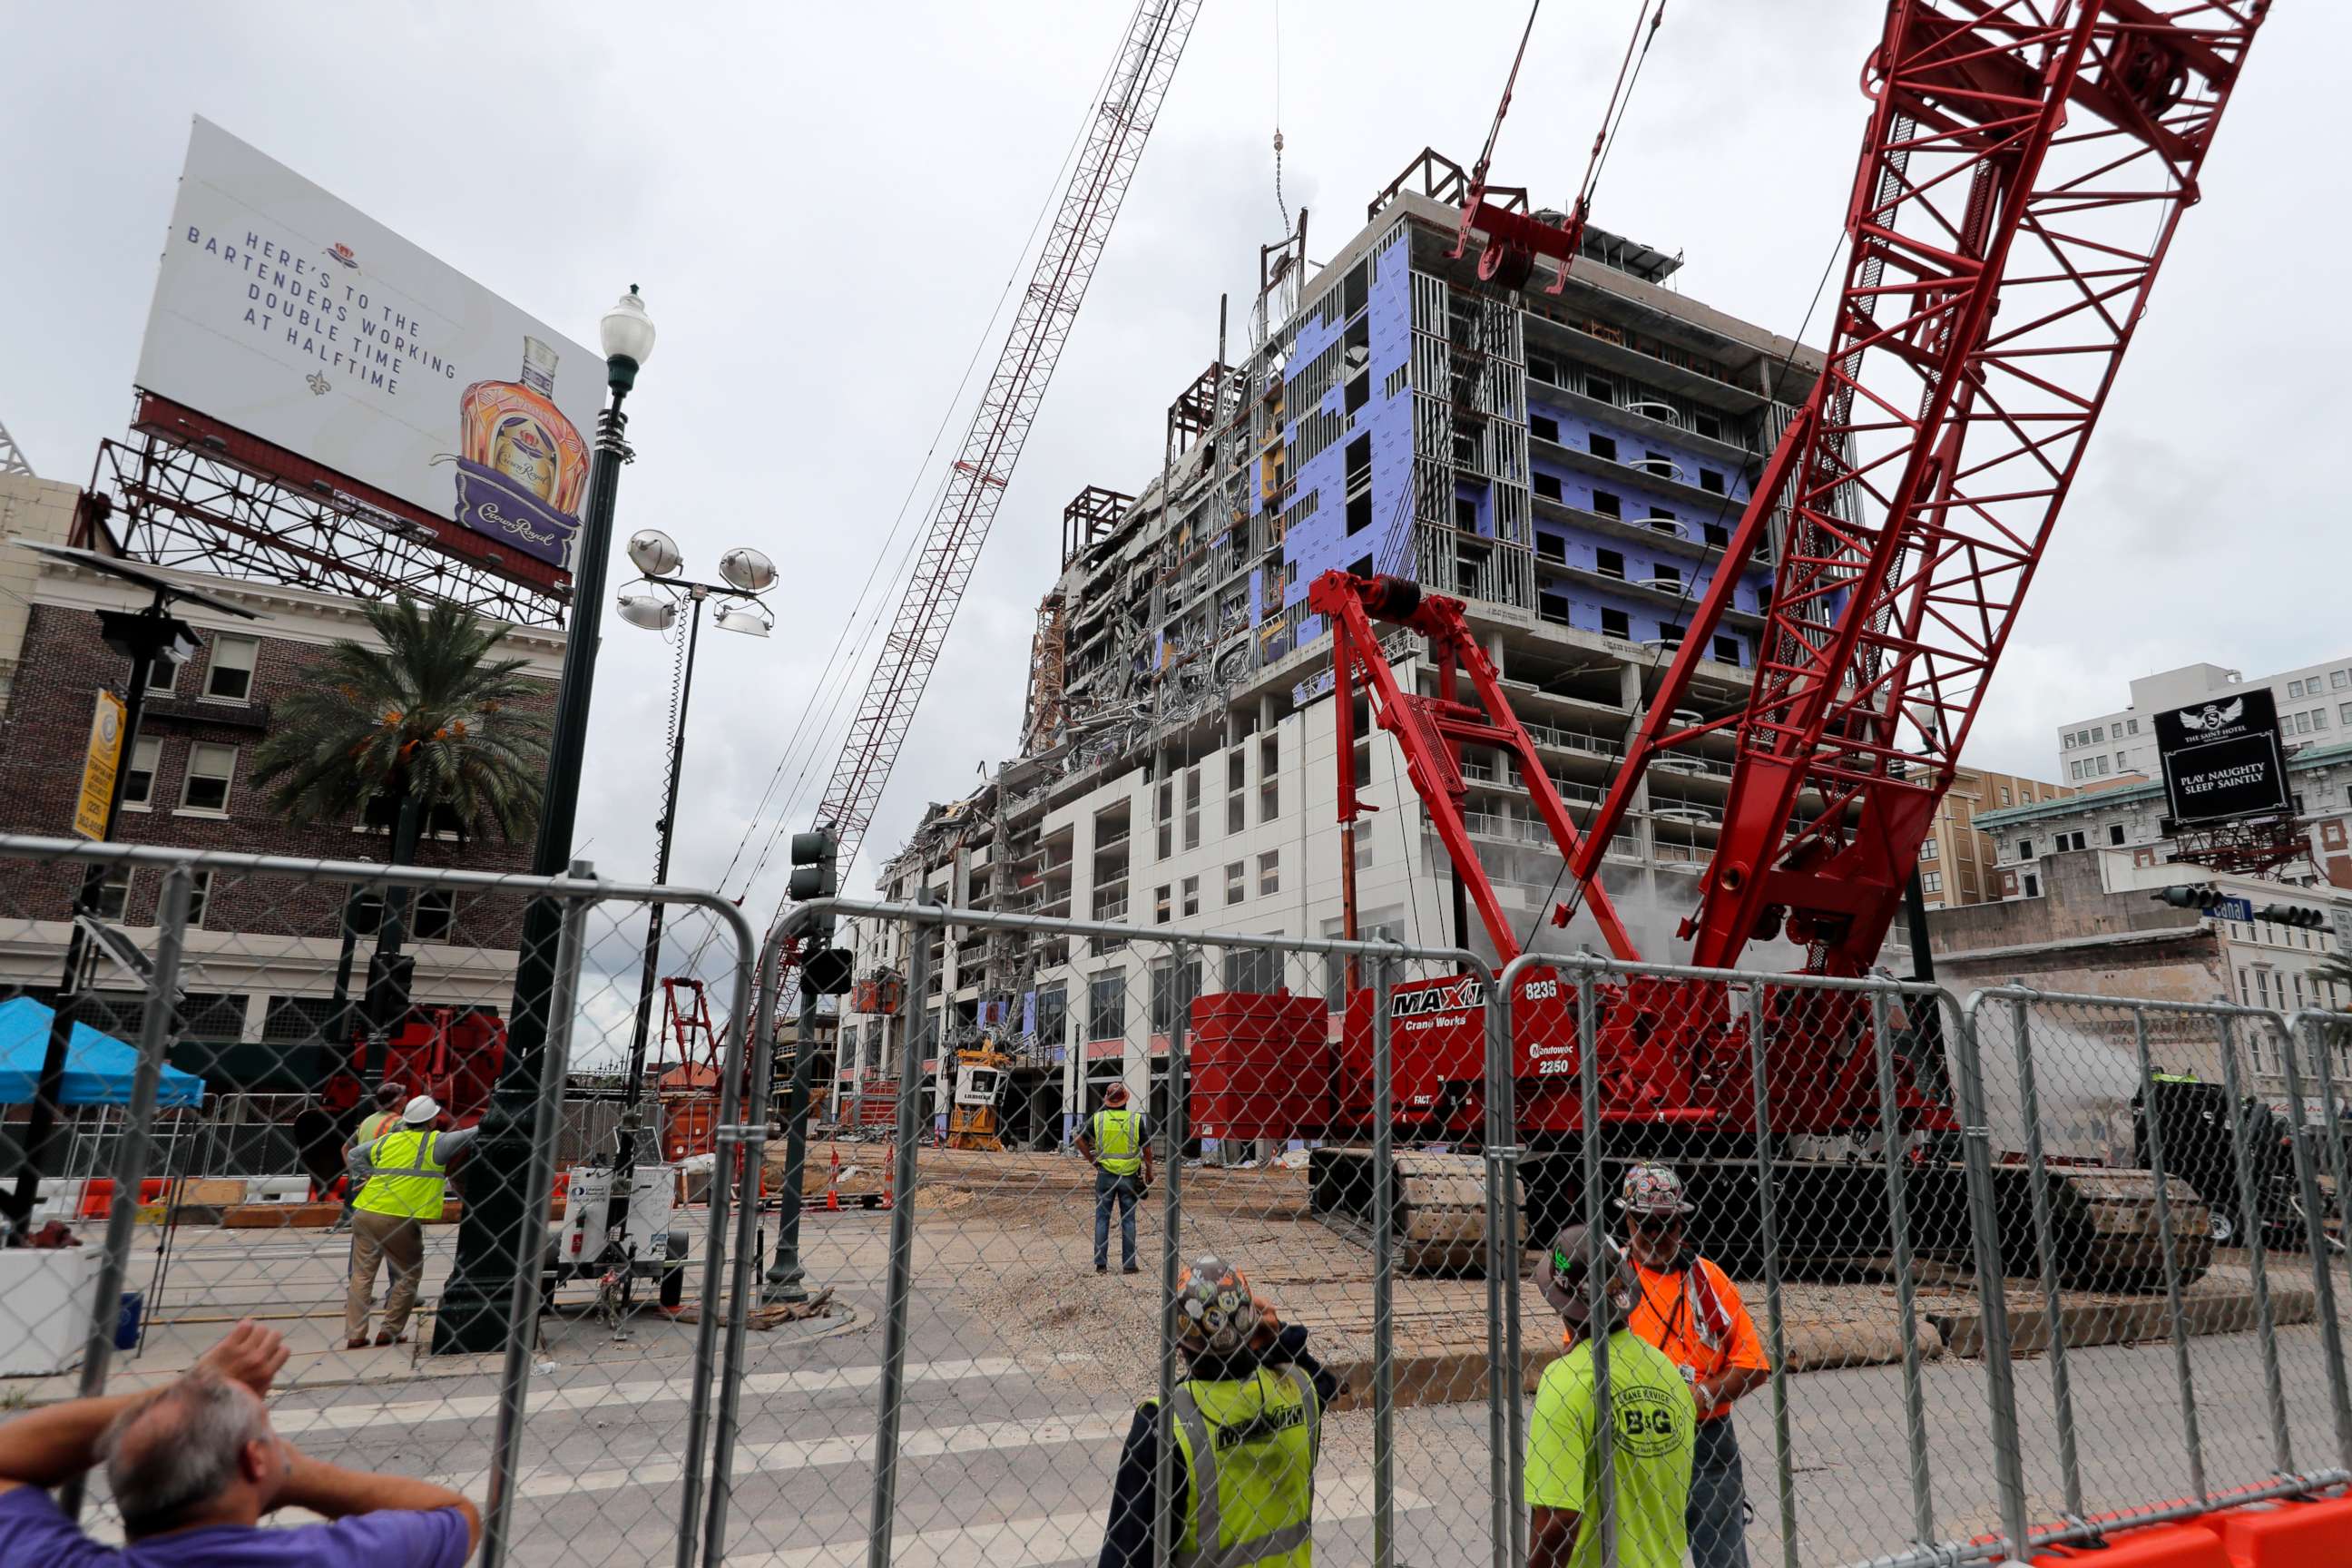 PHOTO: Workers watch as a wrecking ball knocks debris loose from the Hard Rock Hotel building collapse site in New Orleans, Monday, July 20, 2020.